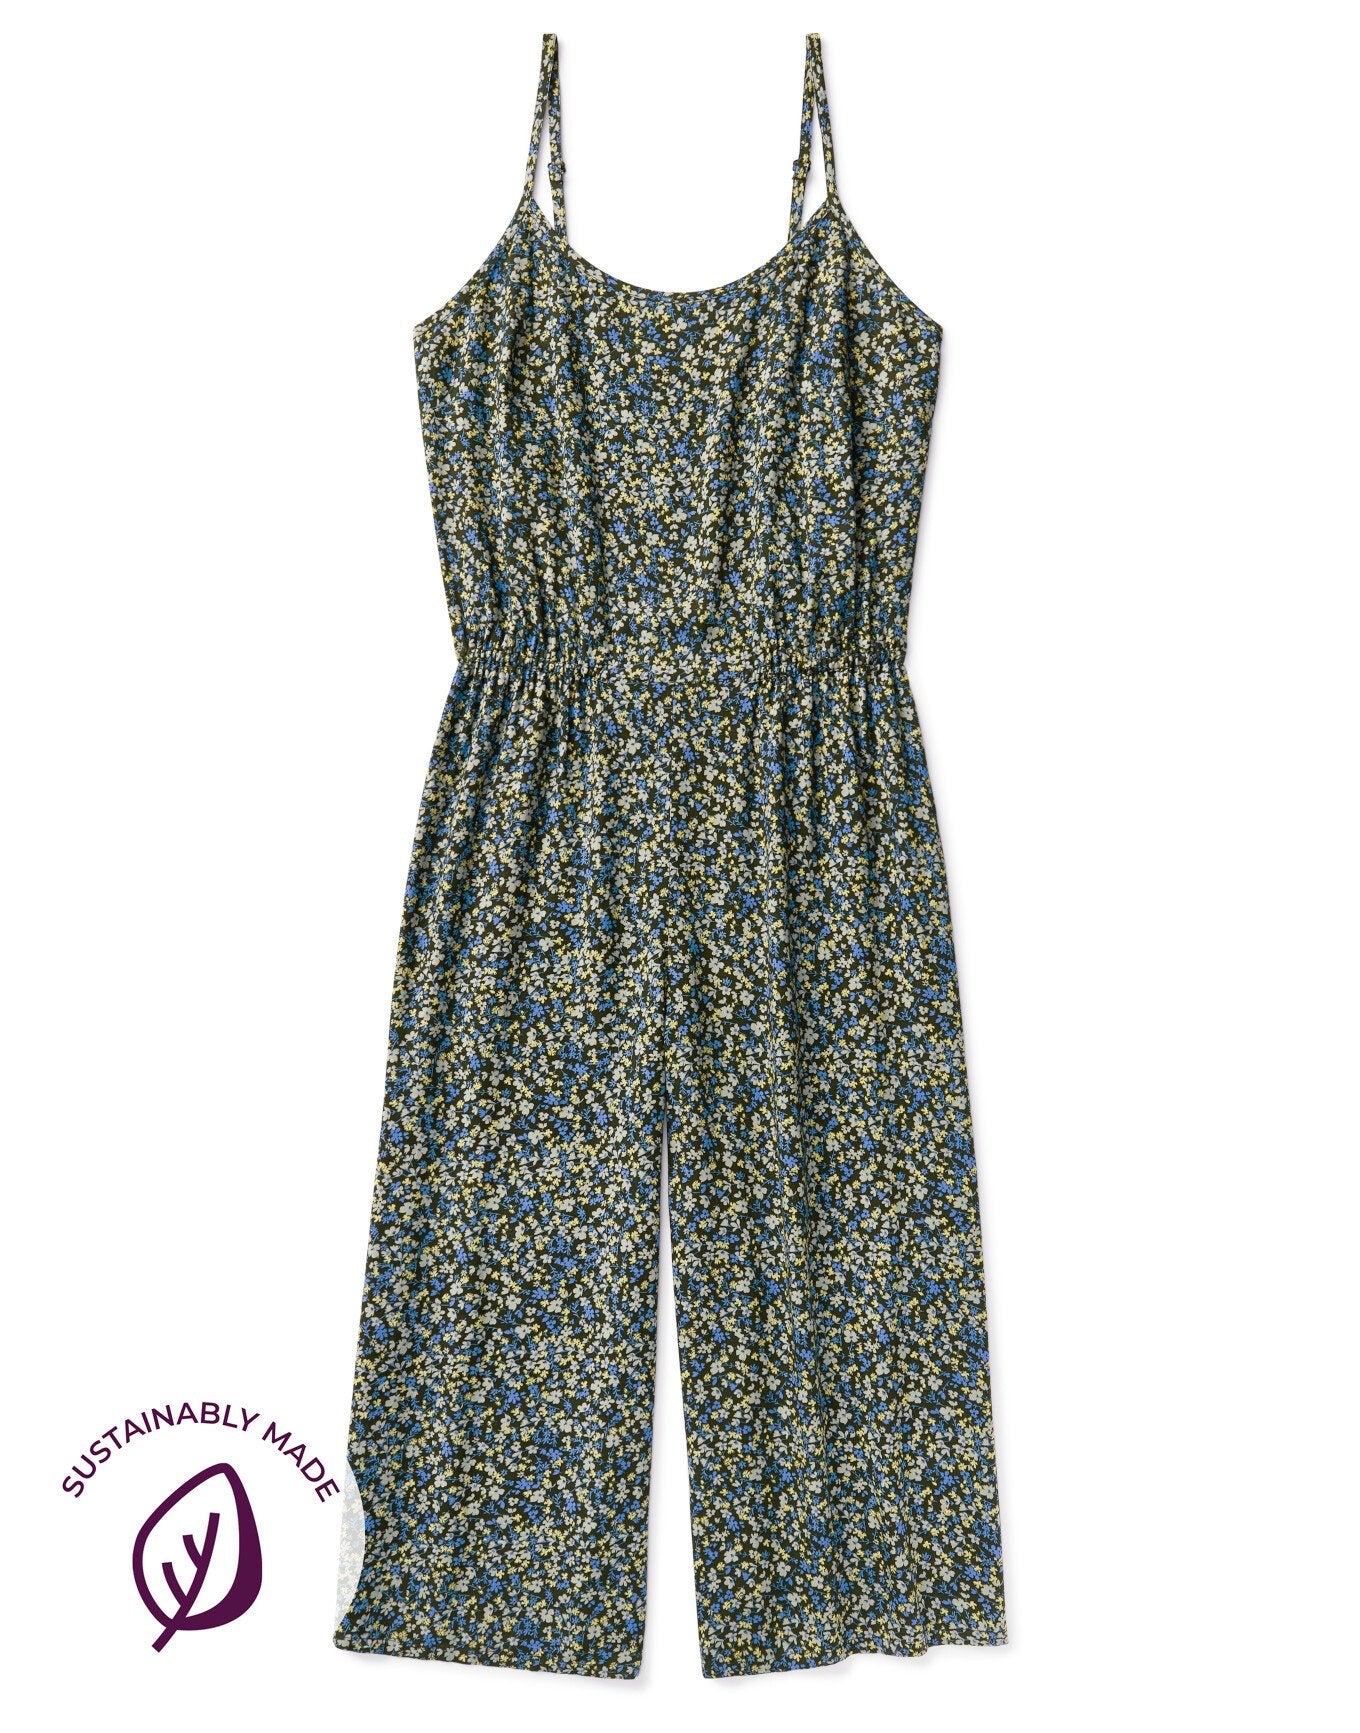 Adore Me Grace 100% Eco-Friendly Rayon Jumpsuit in color Meadow Ditsies C01 and shape romper